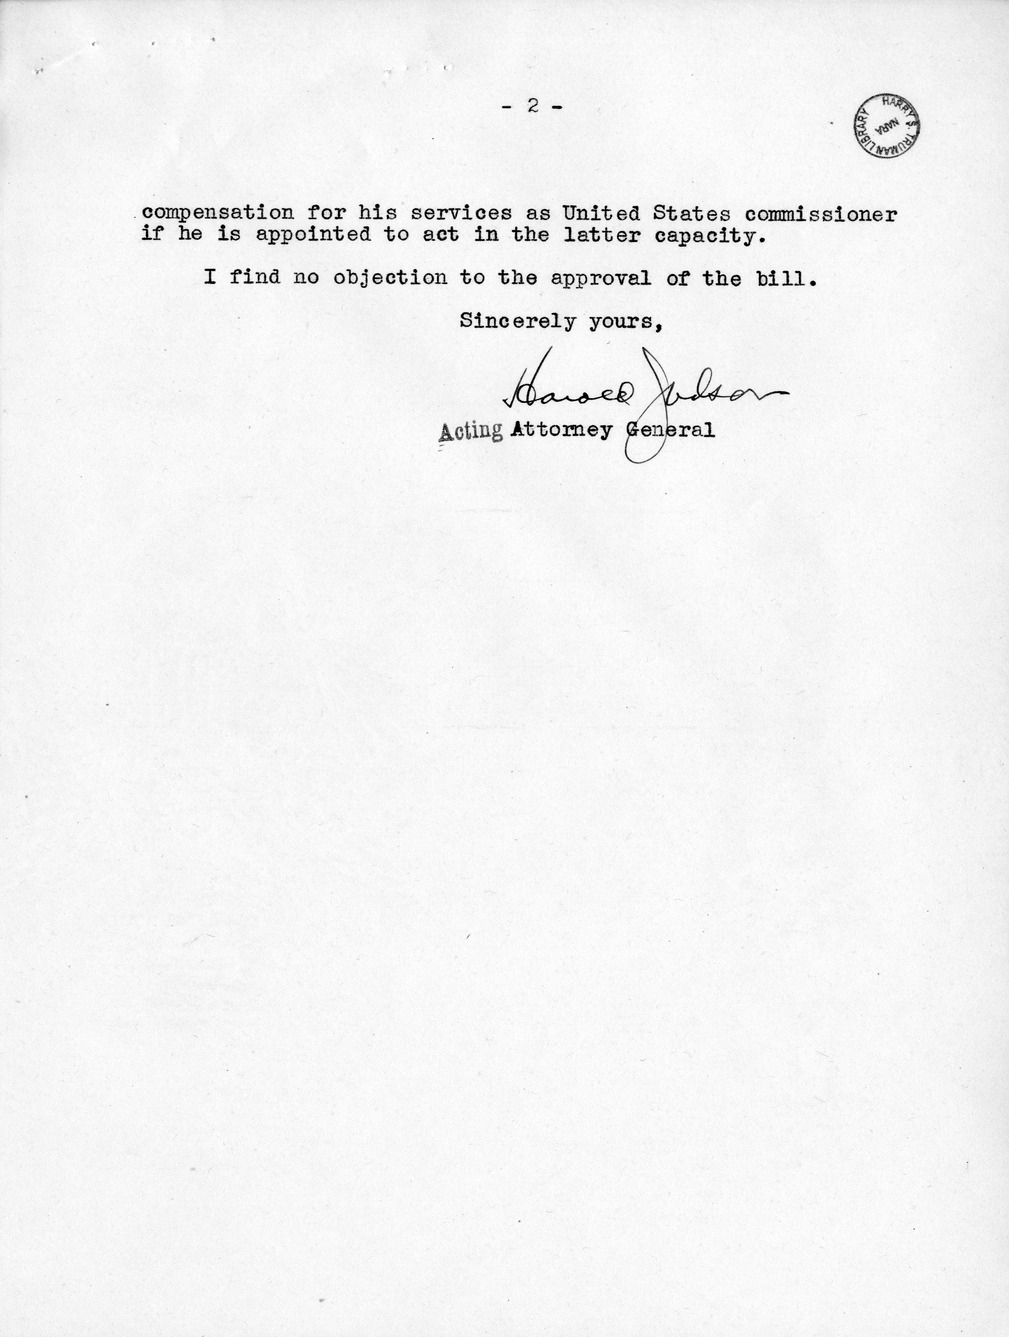 Memorandum from Frederick J. Bailey to M. C. Latta, H.R. 2465, To Amend Section 20 of the Act of May 28, 1896 (20 Stat. 184; 28 U.S.C. 527) so as to Provide that Nothing therein Contained Shall Preclude a Referee in Bankruptcy or a National Park Commissioner from Appointment also as a United States Commissioner, with Attachments